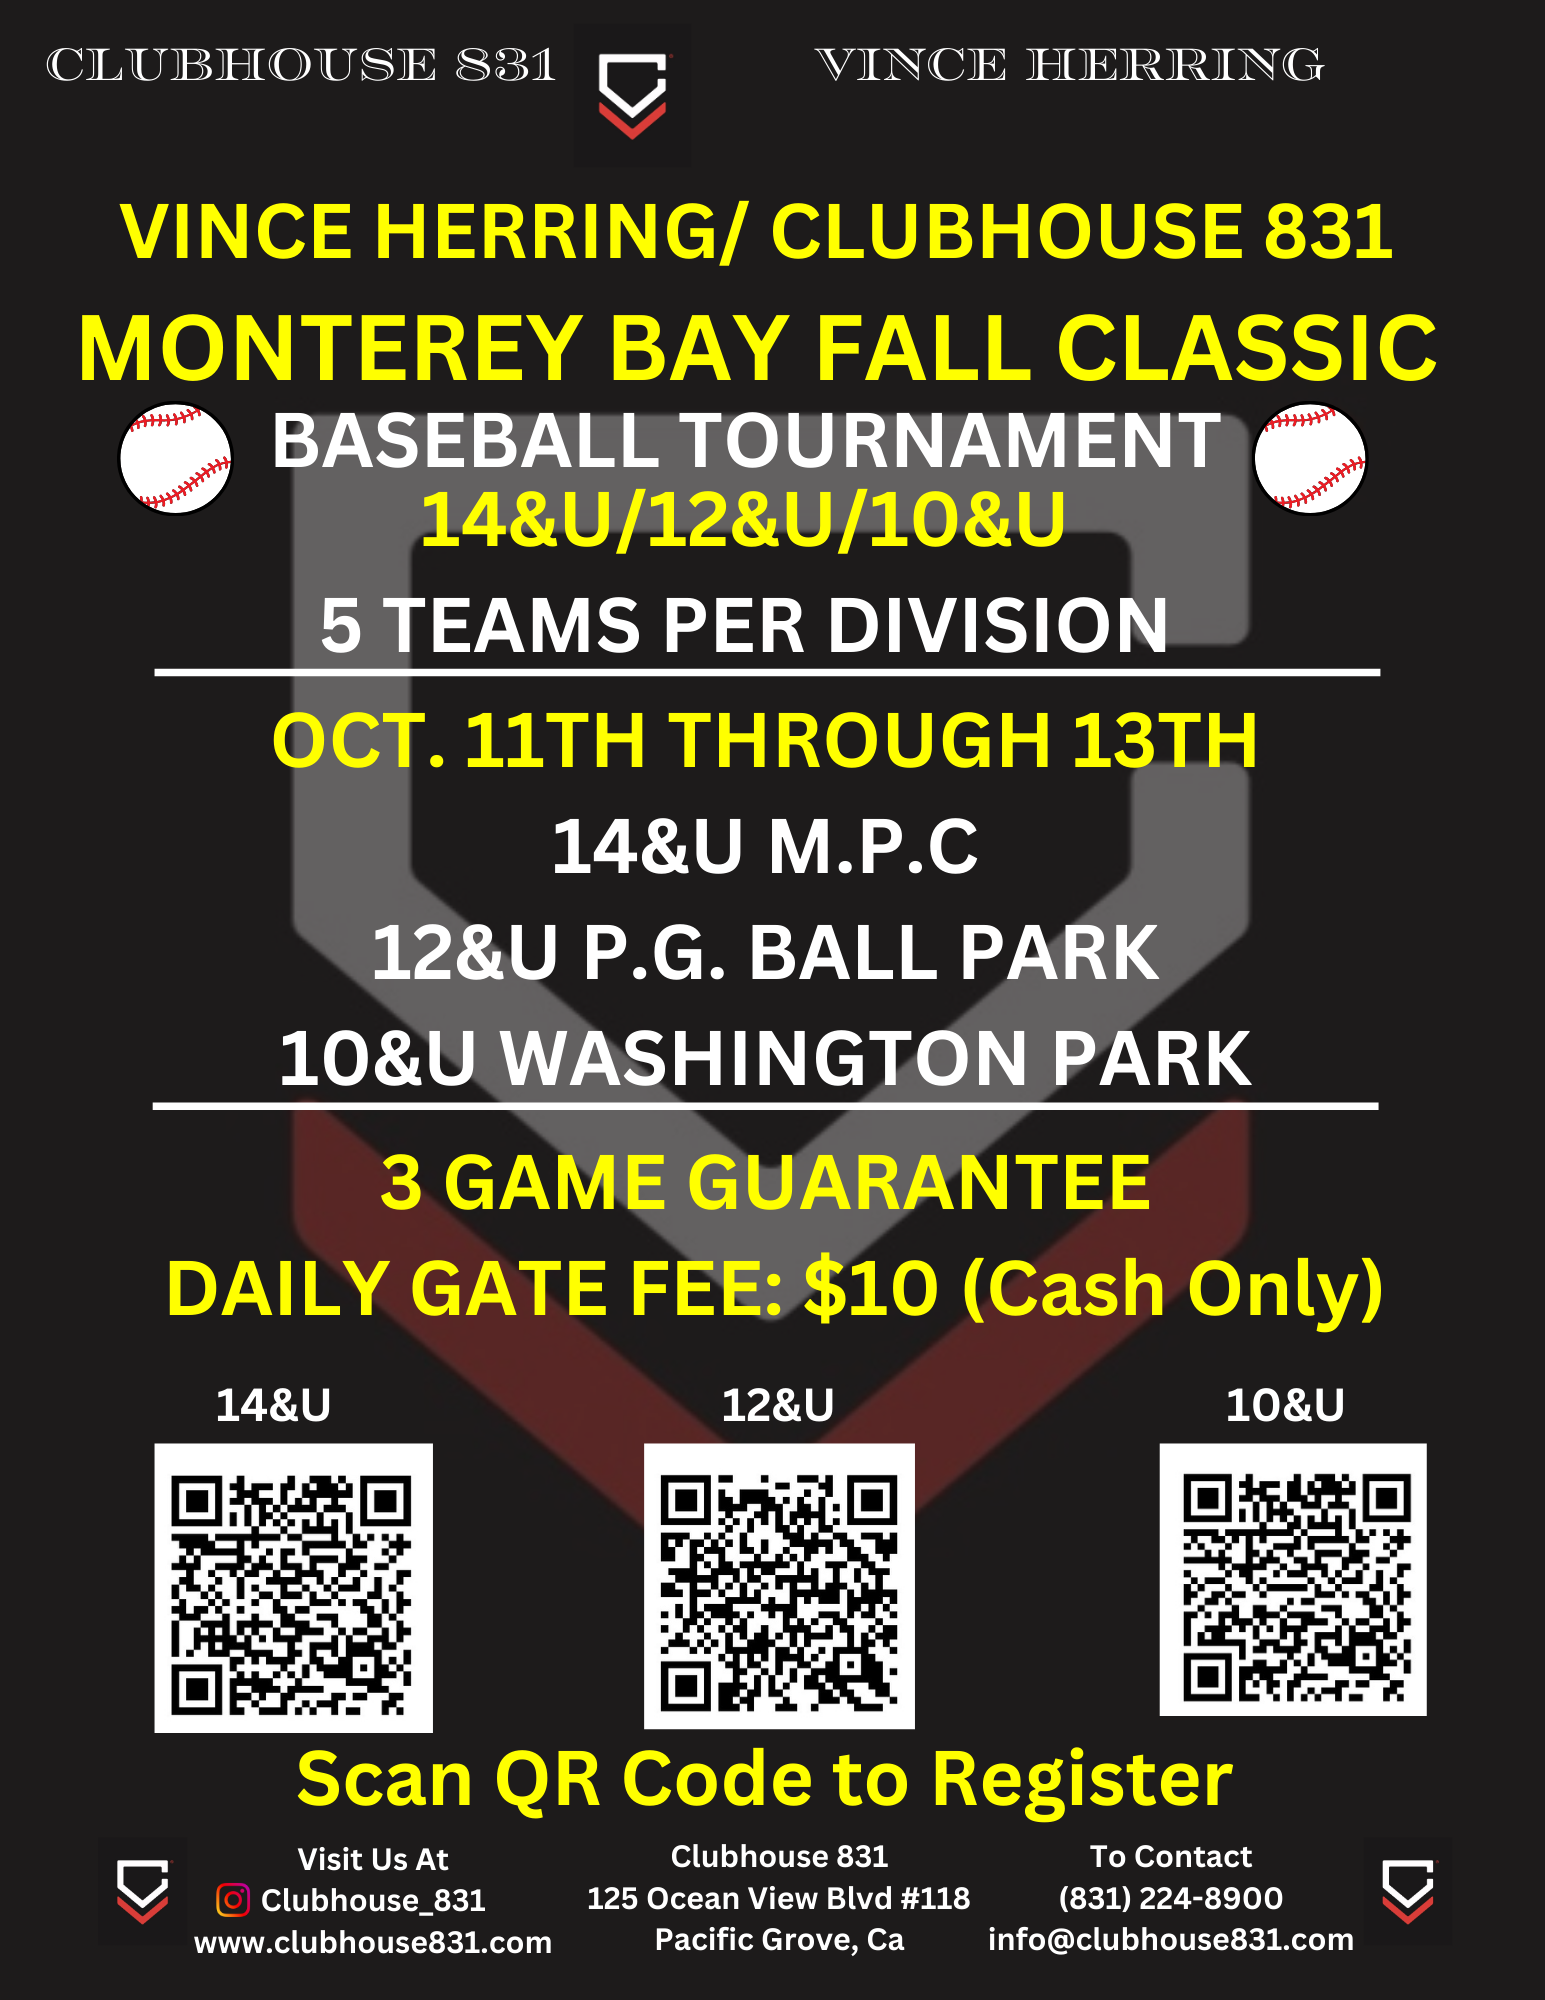 A poster for vince herring 's clubhouse 831 monterey bay fall classic baseball tournament